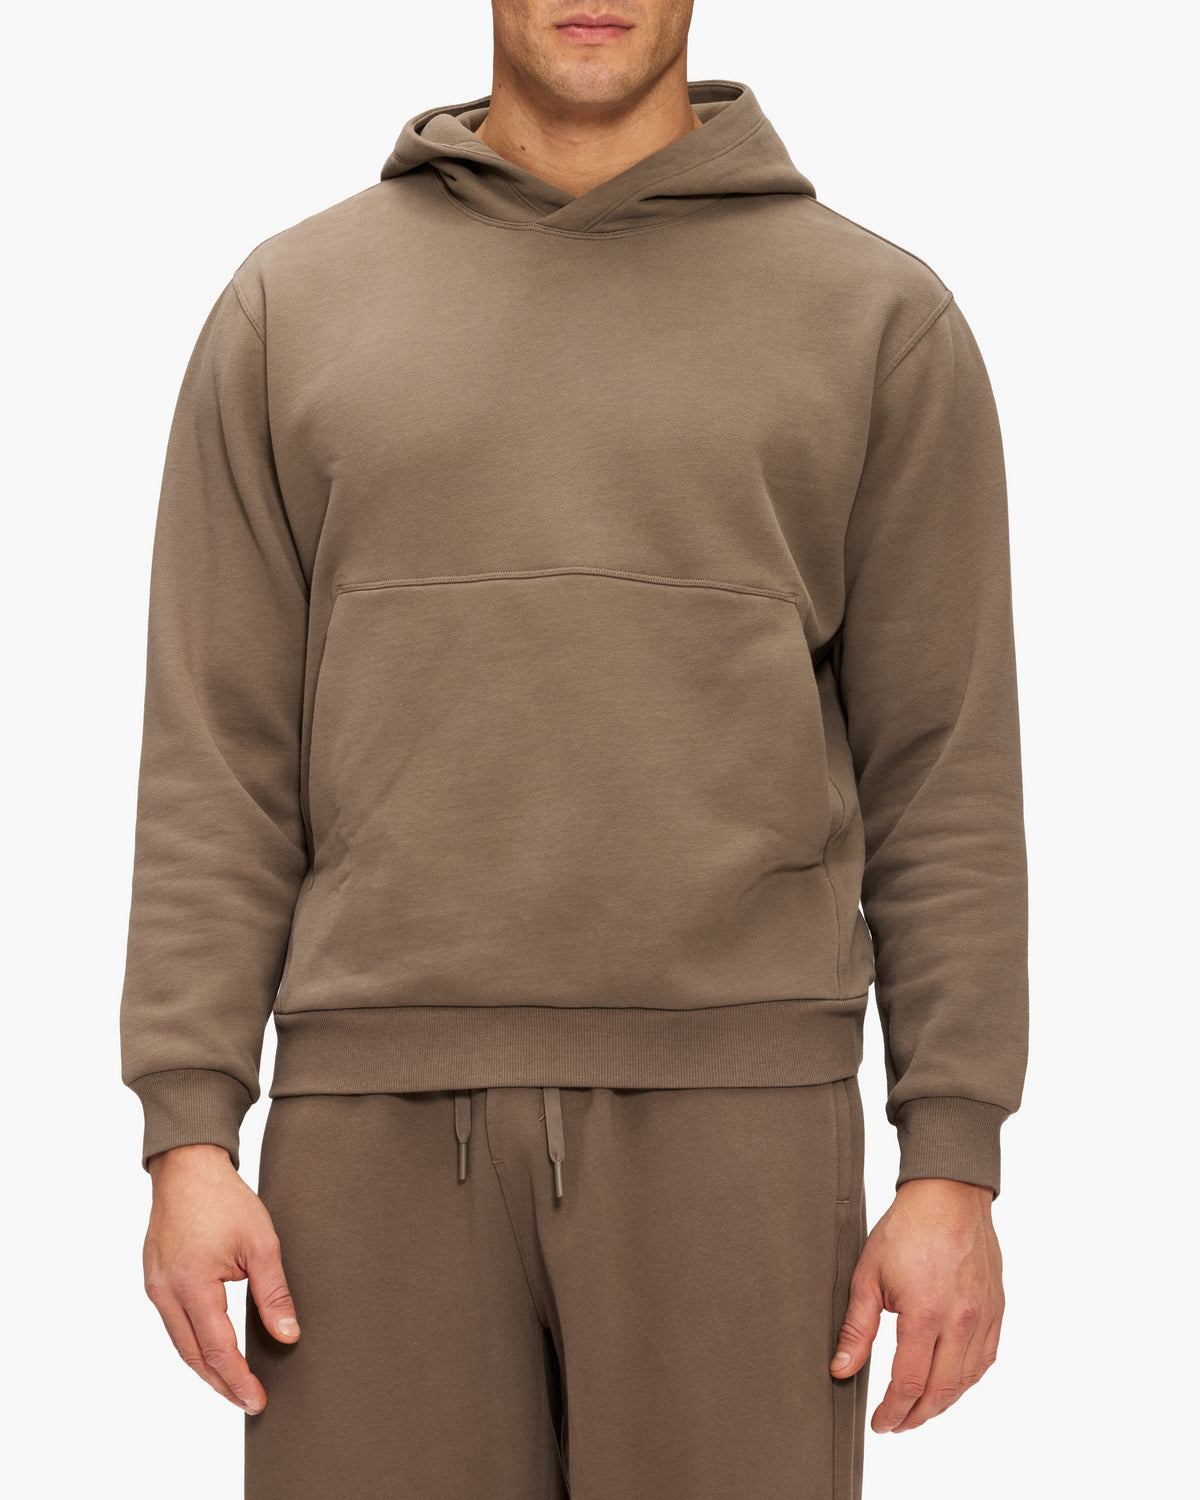 Lululemon License to Train Hoodie – The Shop at Equinox